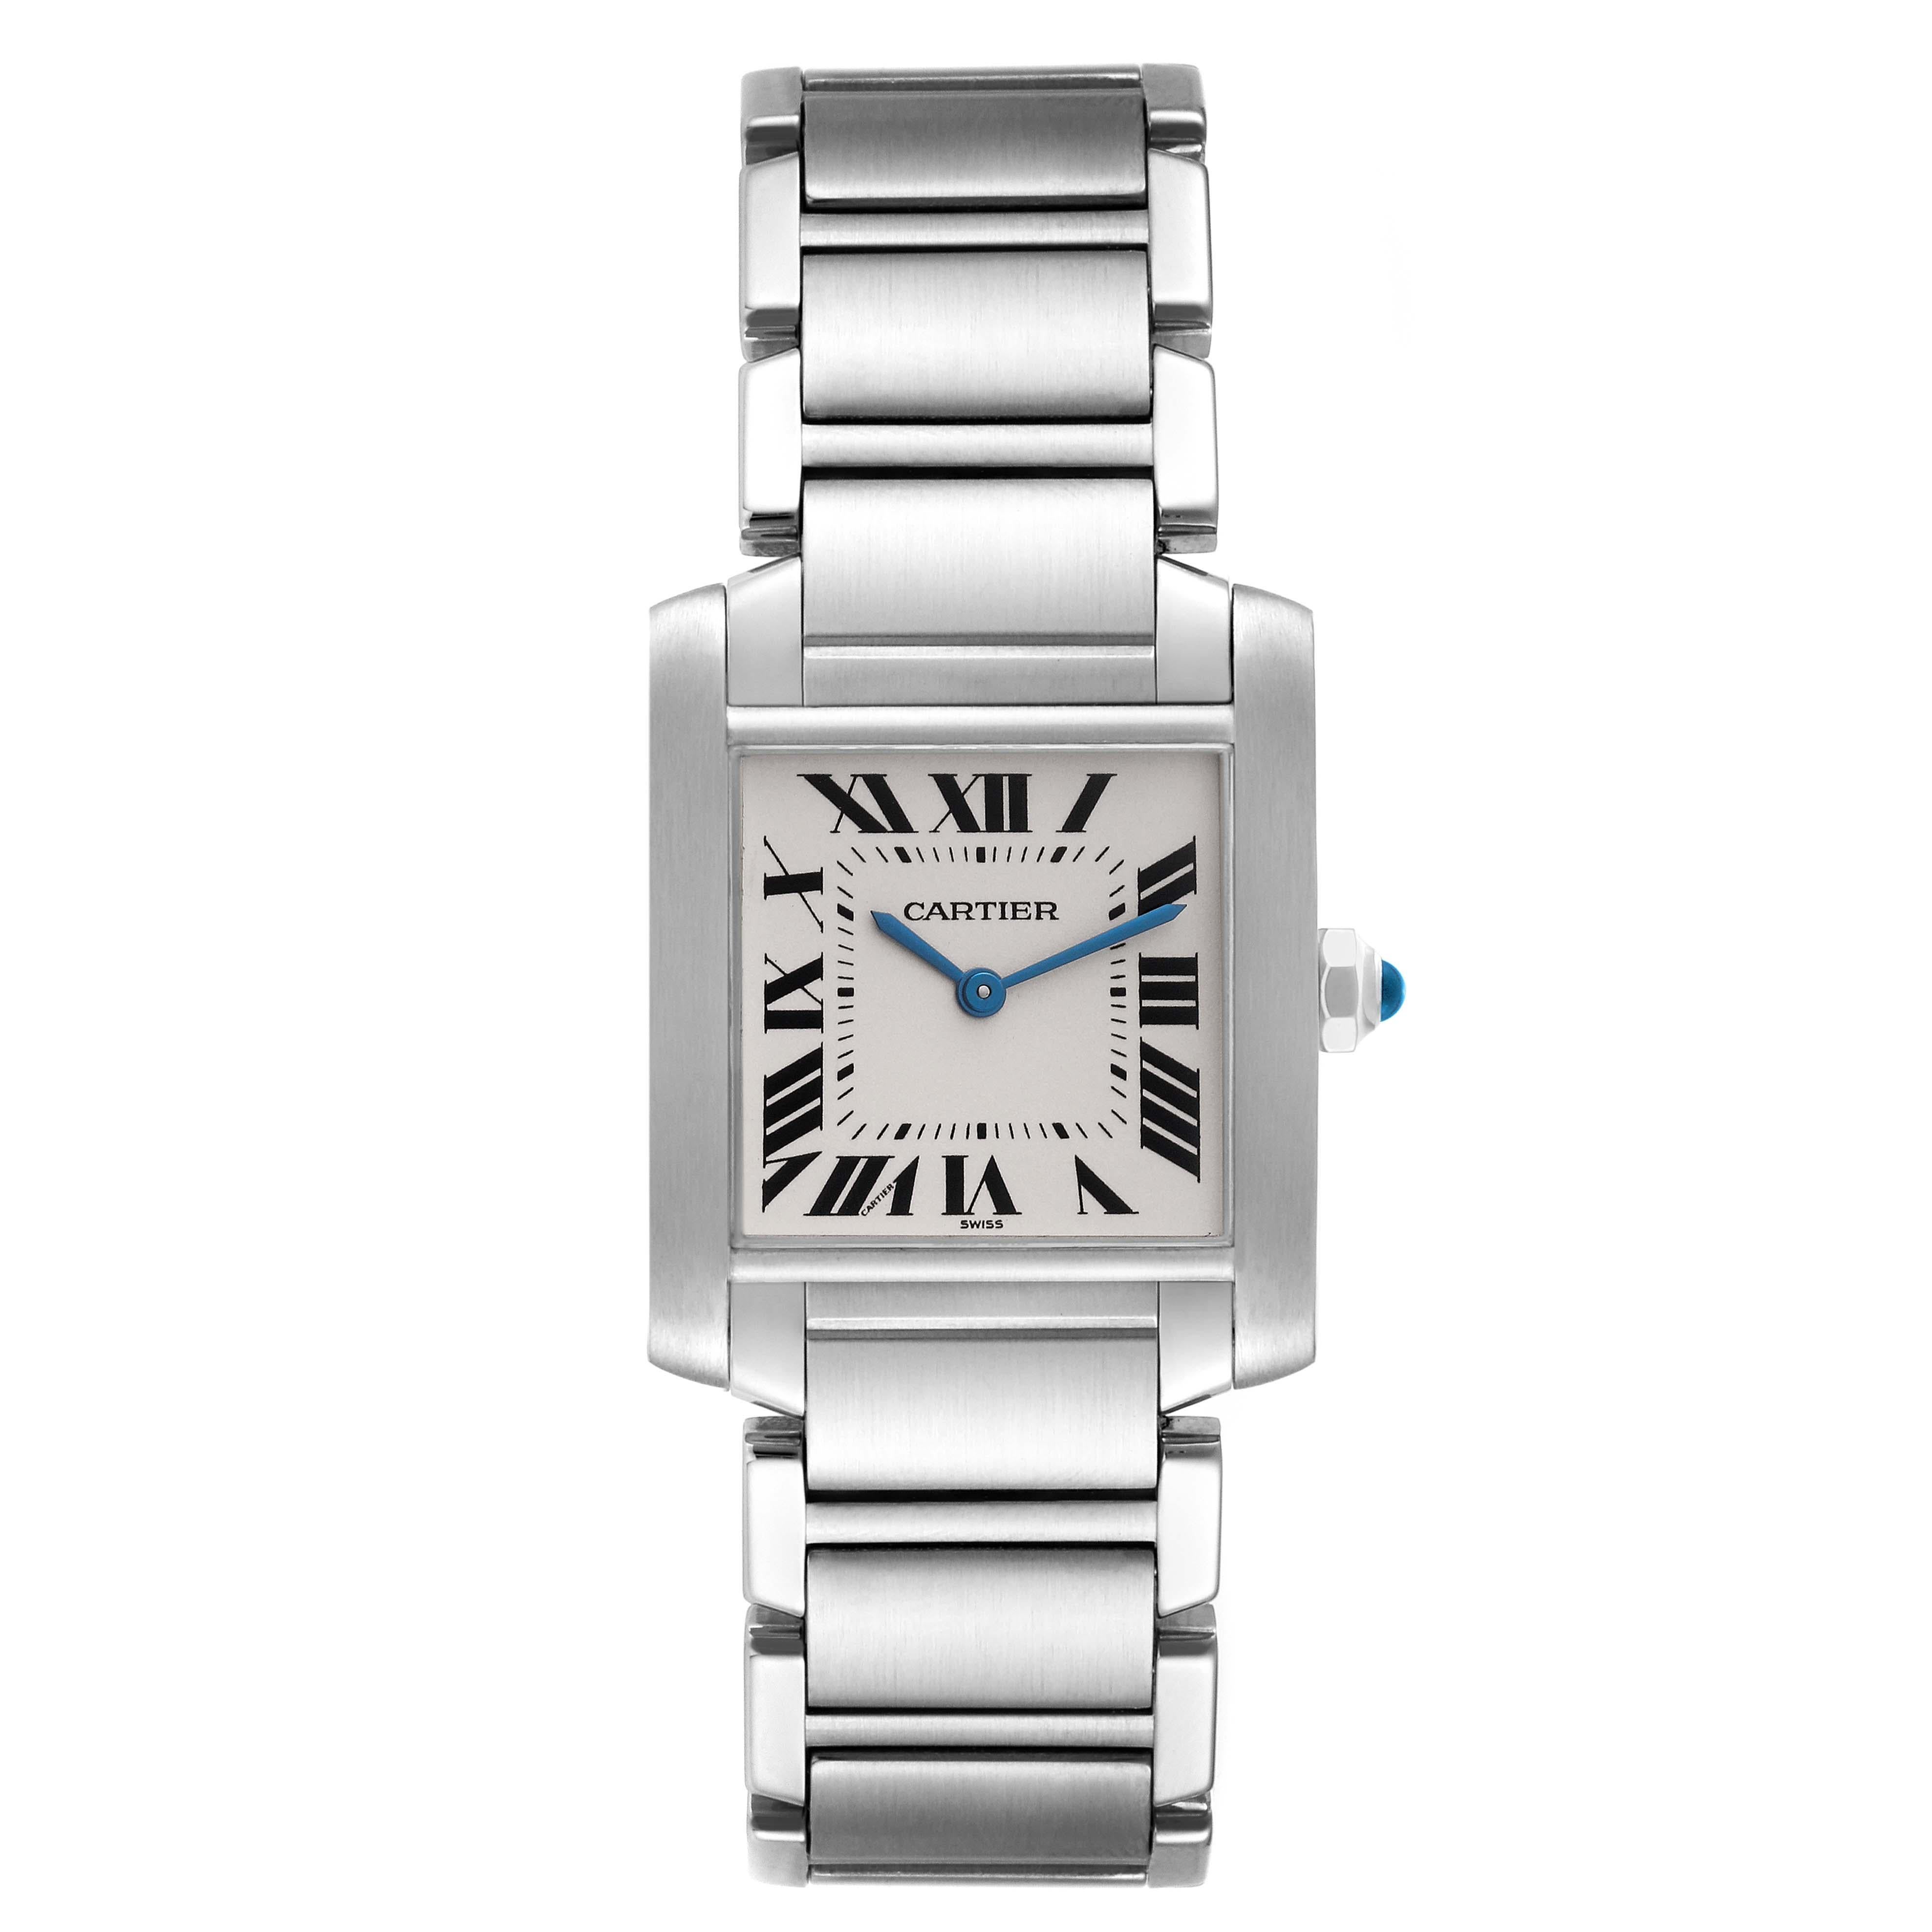 Cartier Tank Francaise Midsize Silver Dial Ladies Watch W51003Q3. Quartz movement. Rectangular stainless steel 25.0 X 30.0 mm case. Octagonal crown set with a blue spinel cabochon. . Scratch resistant sapphire crystal. Silver grained dial with black